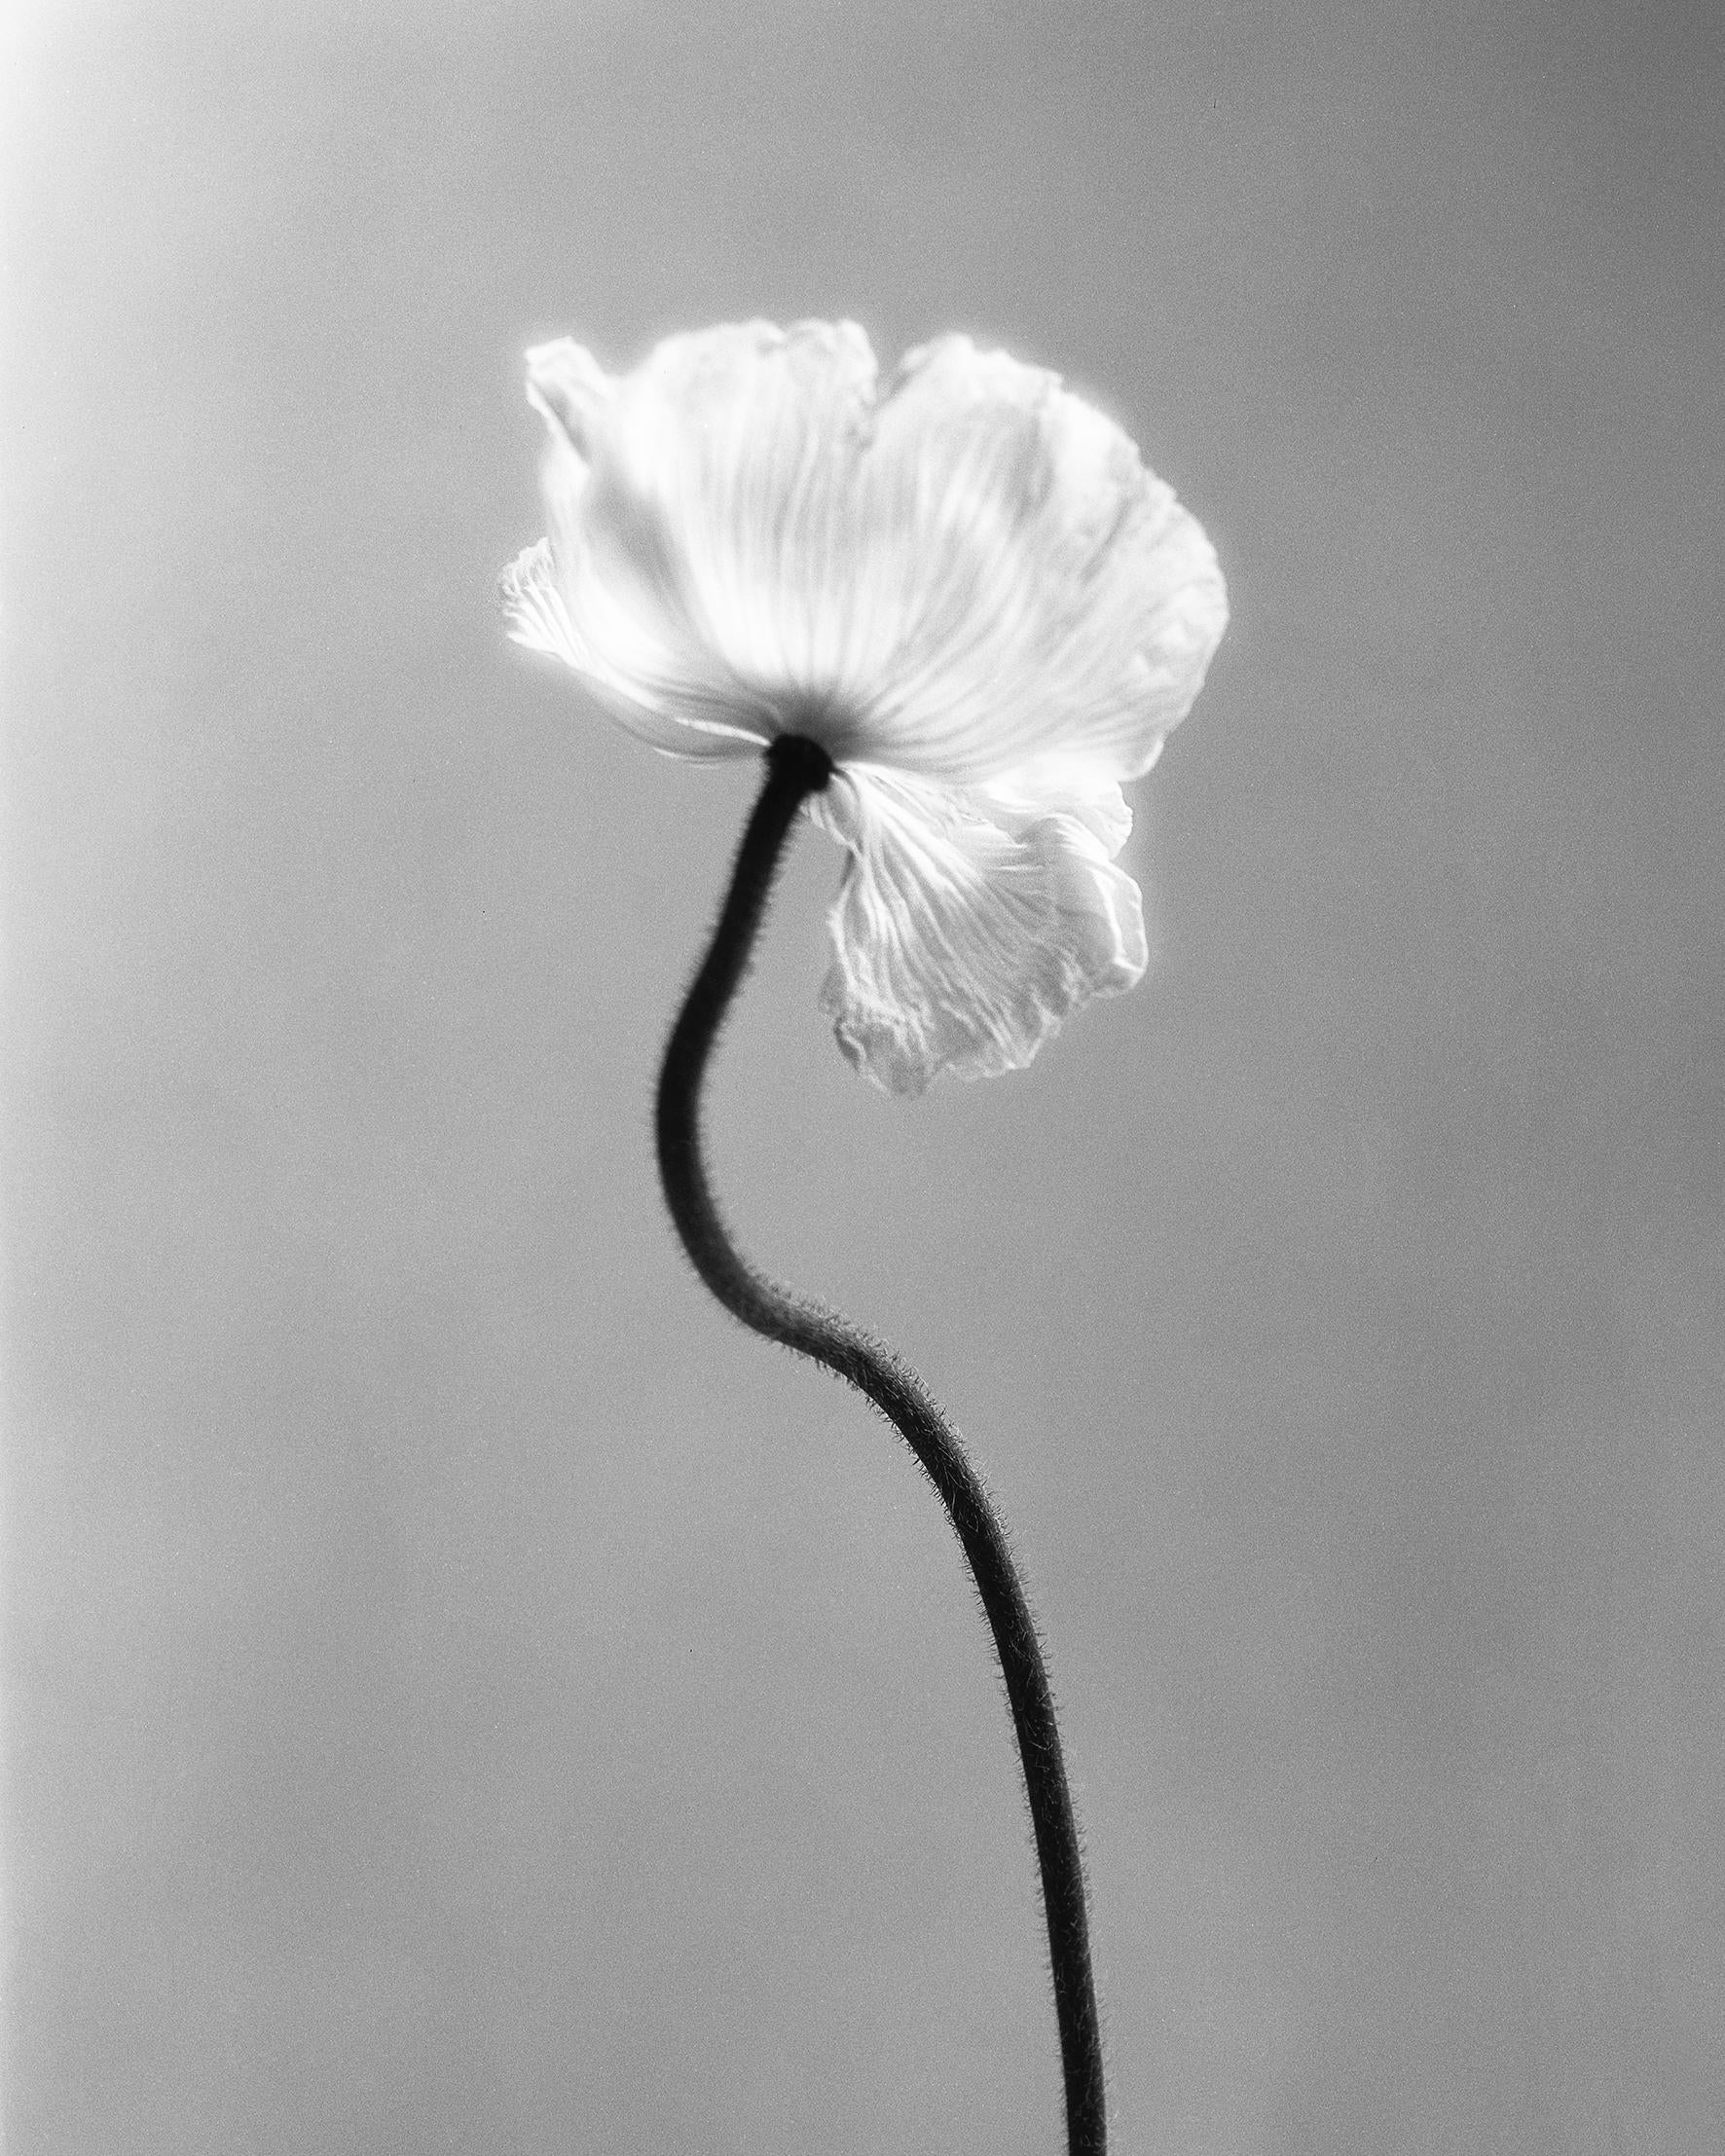 Ugne Pouwell Still-Life Photograph - Poppy No.3 - Analogue black and white floral photography, Limited edition of 10.